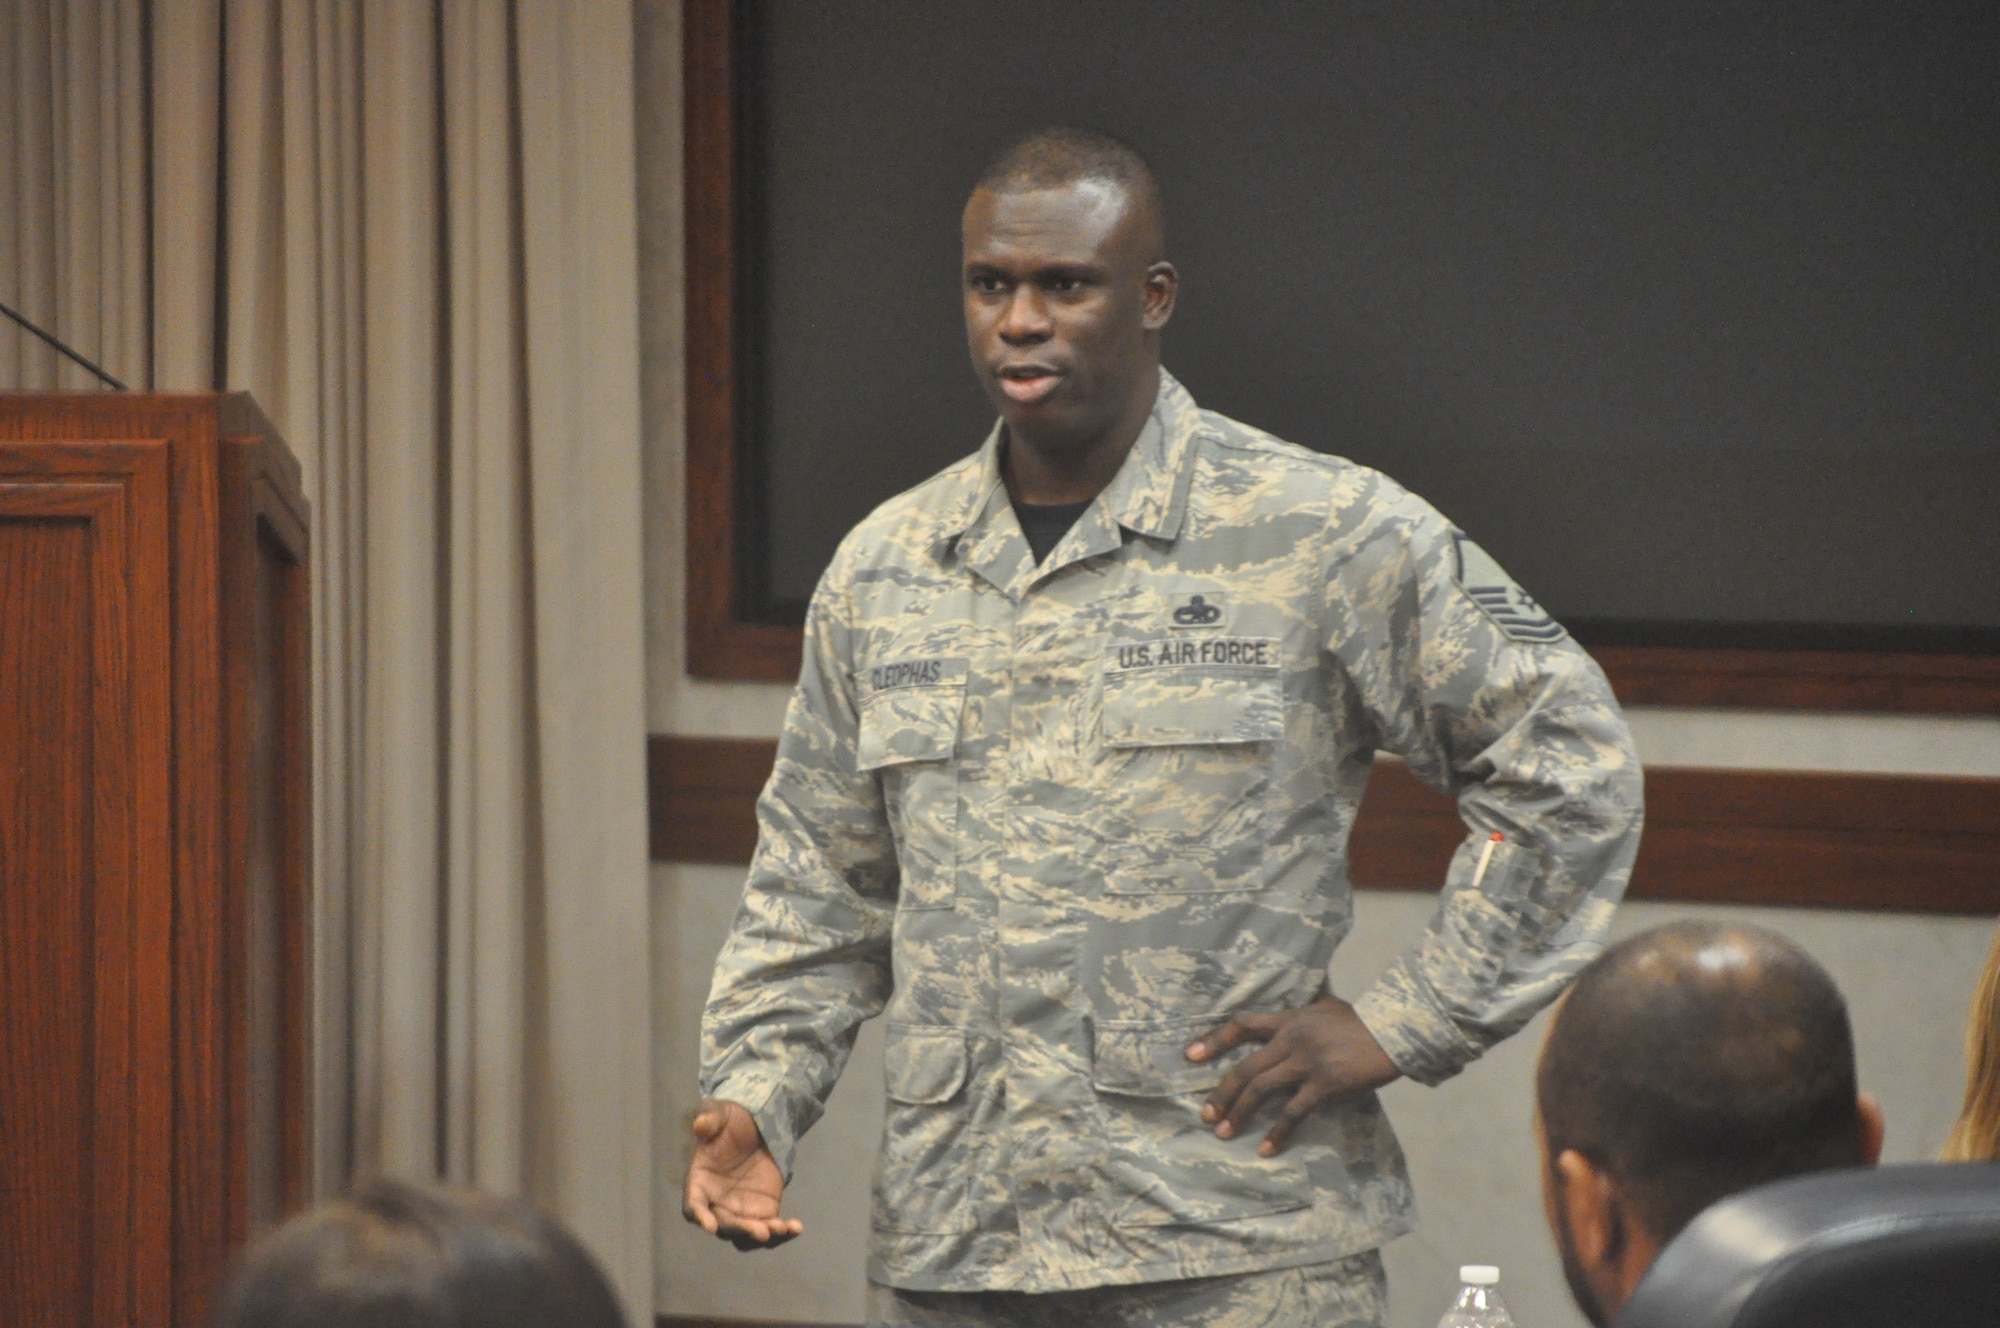 Superintendent of Continuous Improvement with the 552nd Maintenance Group, Master Sgt. Shawn Cleophas, shared his personal account of resiliency while working to gain custody of his young son and subsequently becoming a single military father with the Wingman Day audience. Wingman Day is time set aside for squadrons to promote wellness, resiliency and comradery as well as to connect Airmen with the various helping agencies at Tinker.